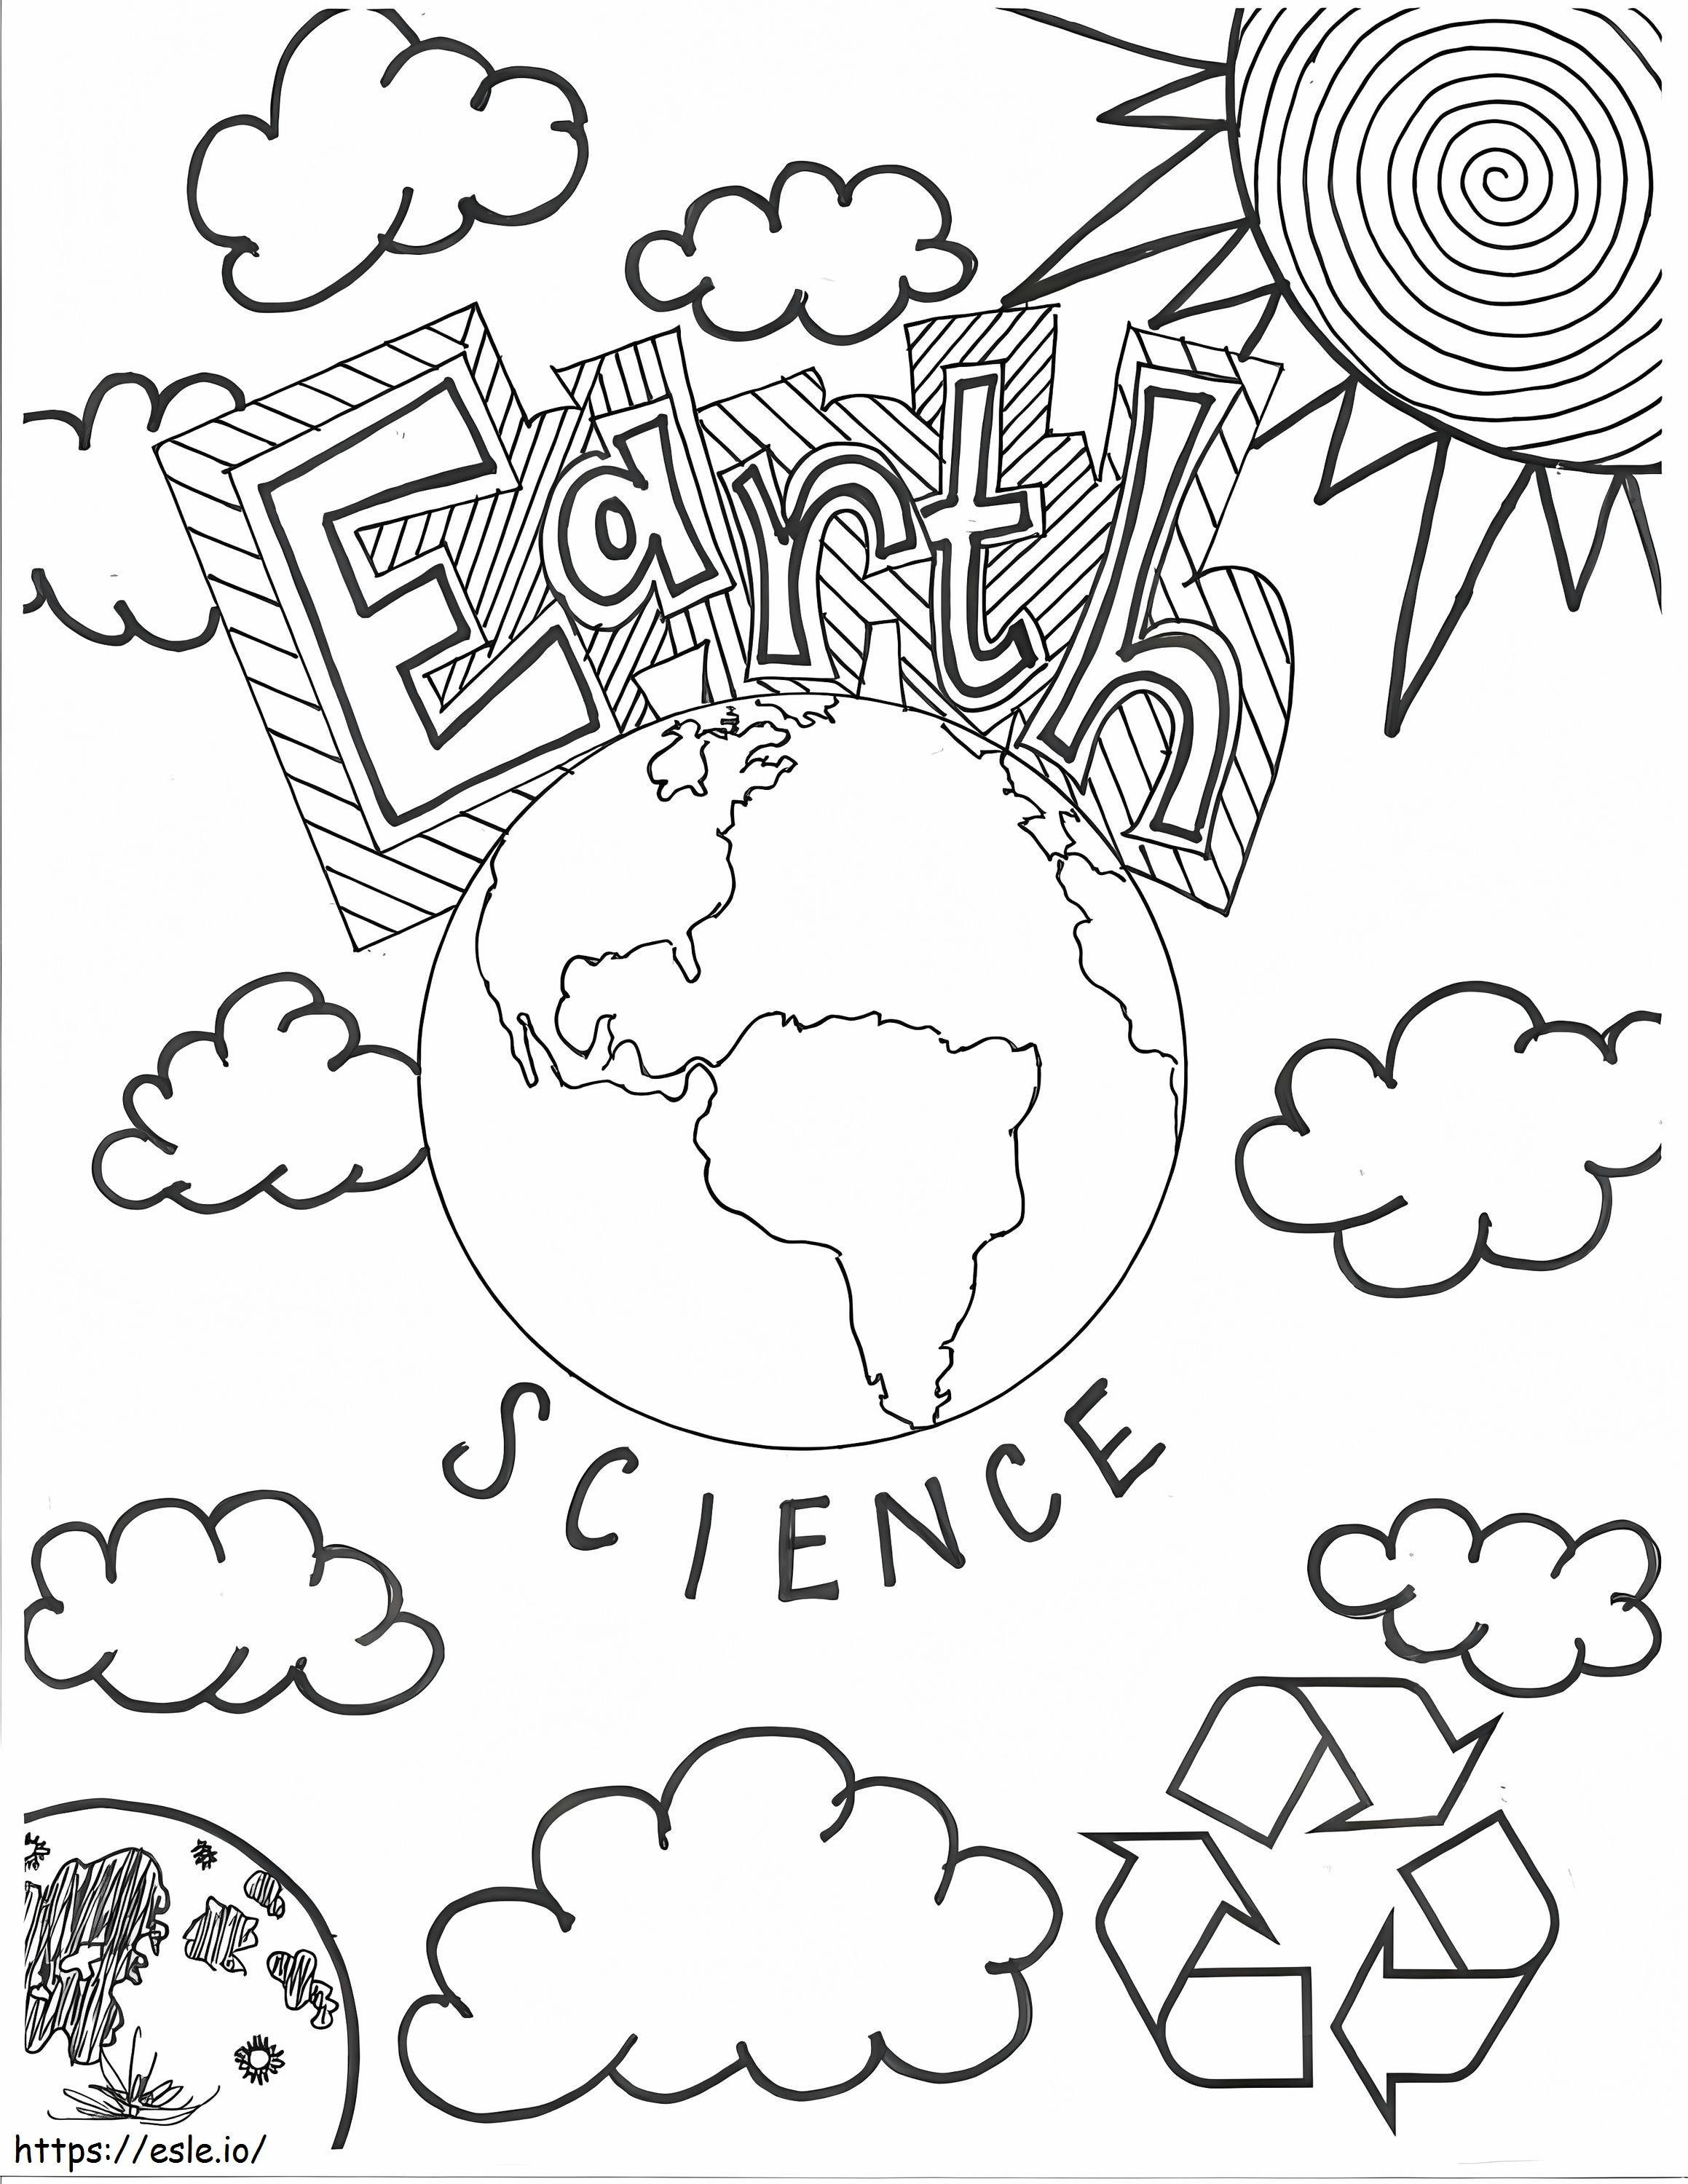 Earth Science coloring page